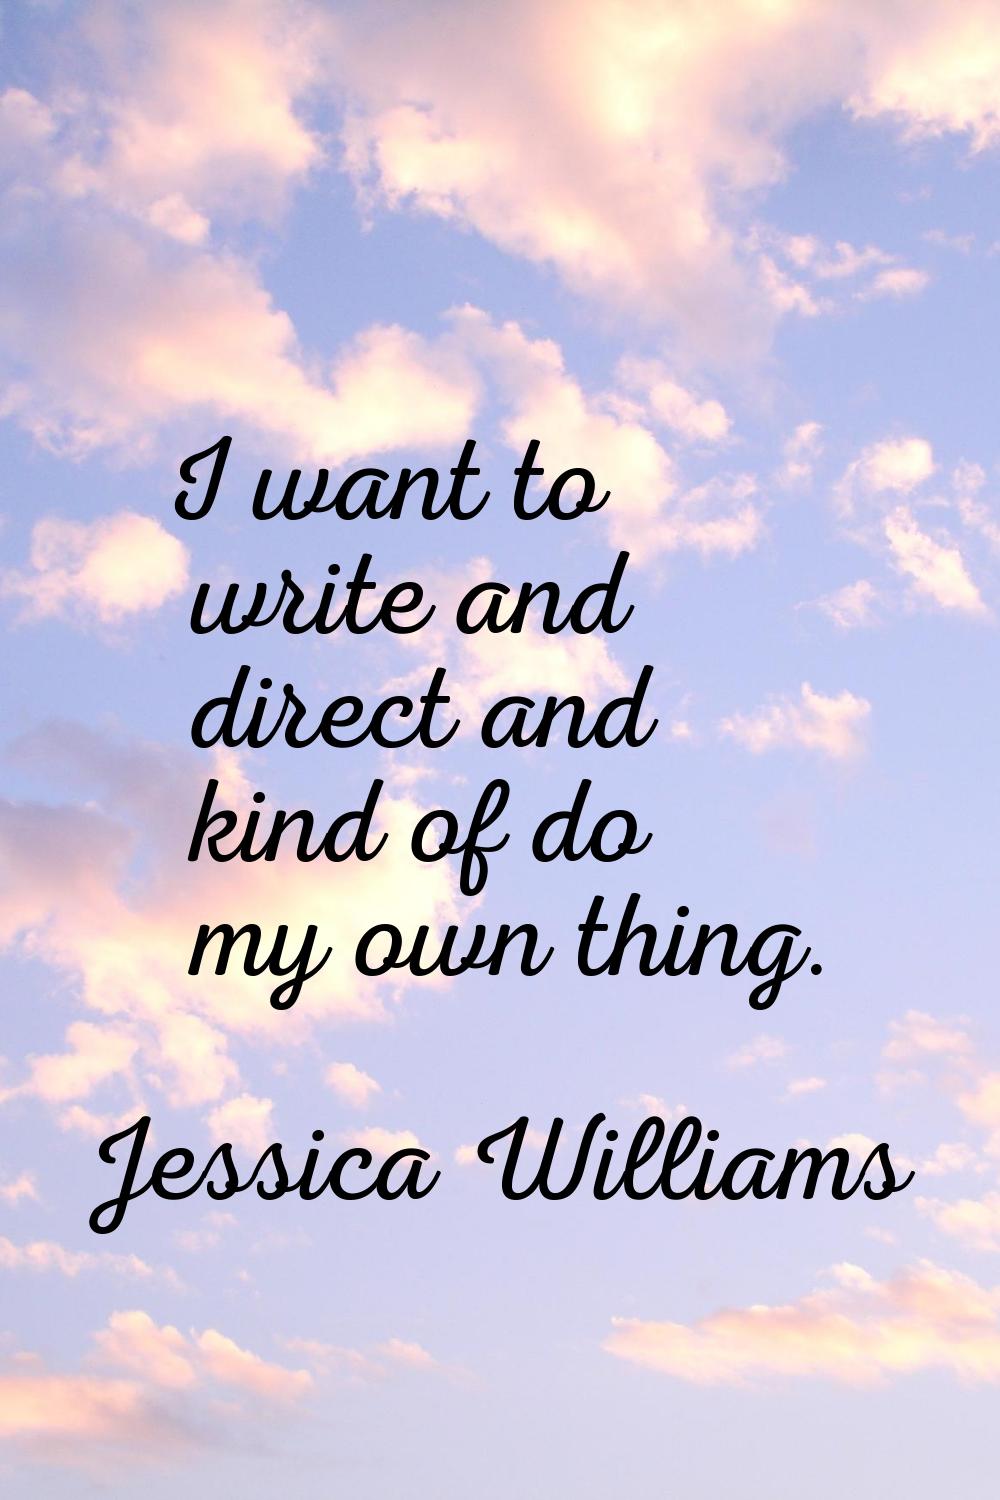 I want to write and direct and kind of do my own thing.